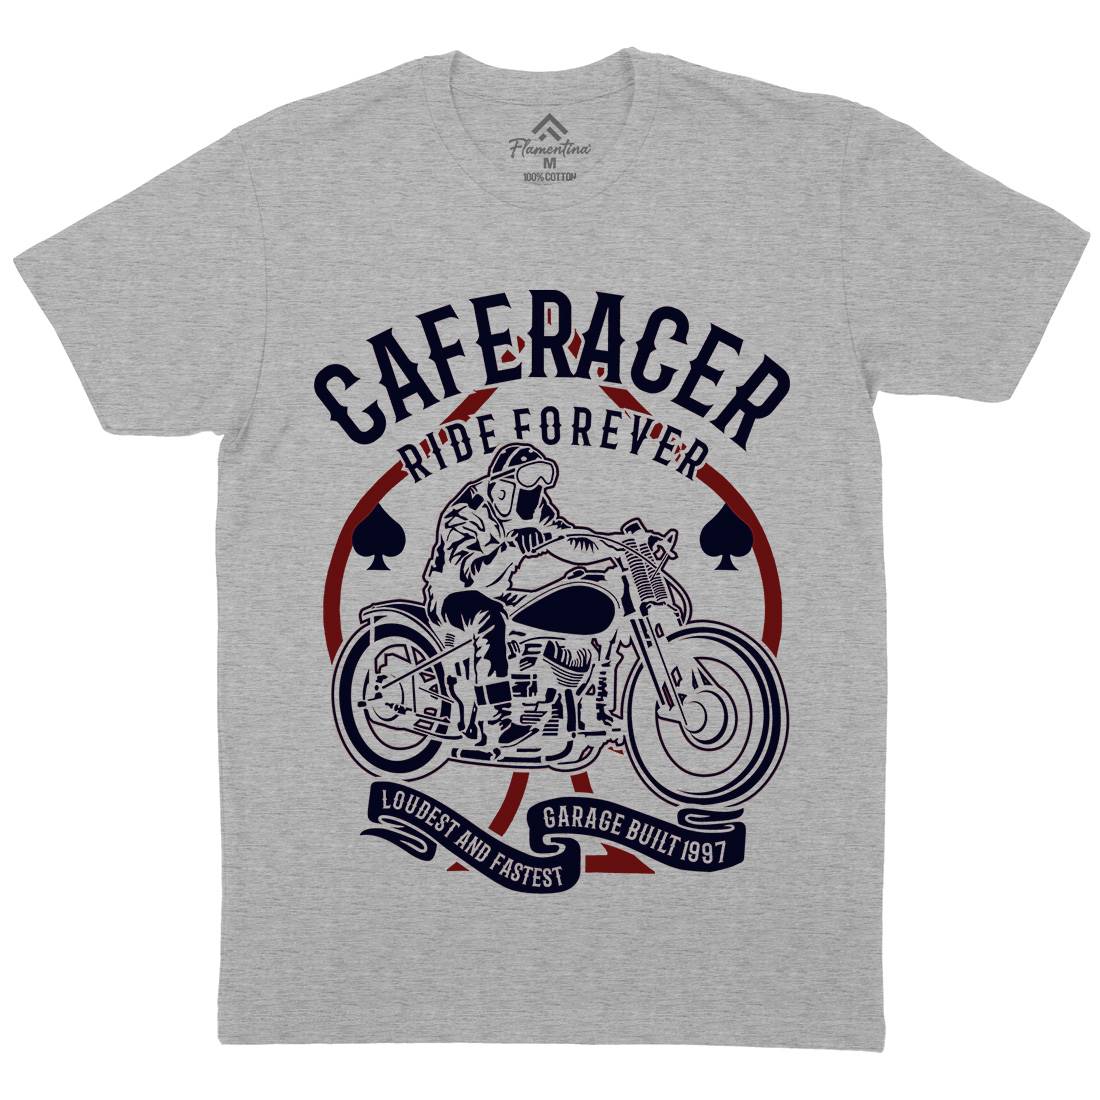 Caferacer Ride Forever Mens Crew Neck T-Shirt Motorcycles B192